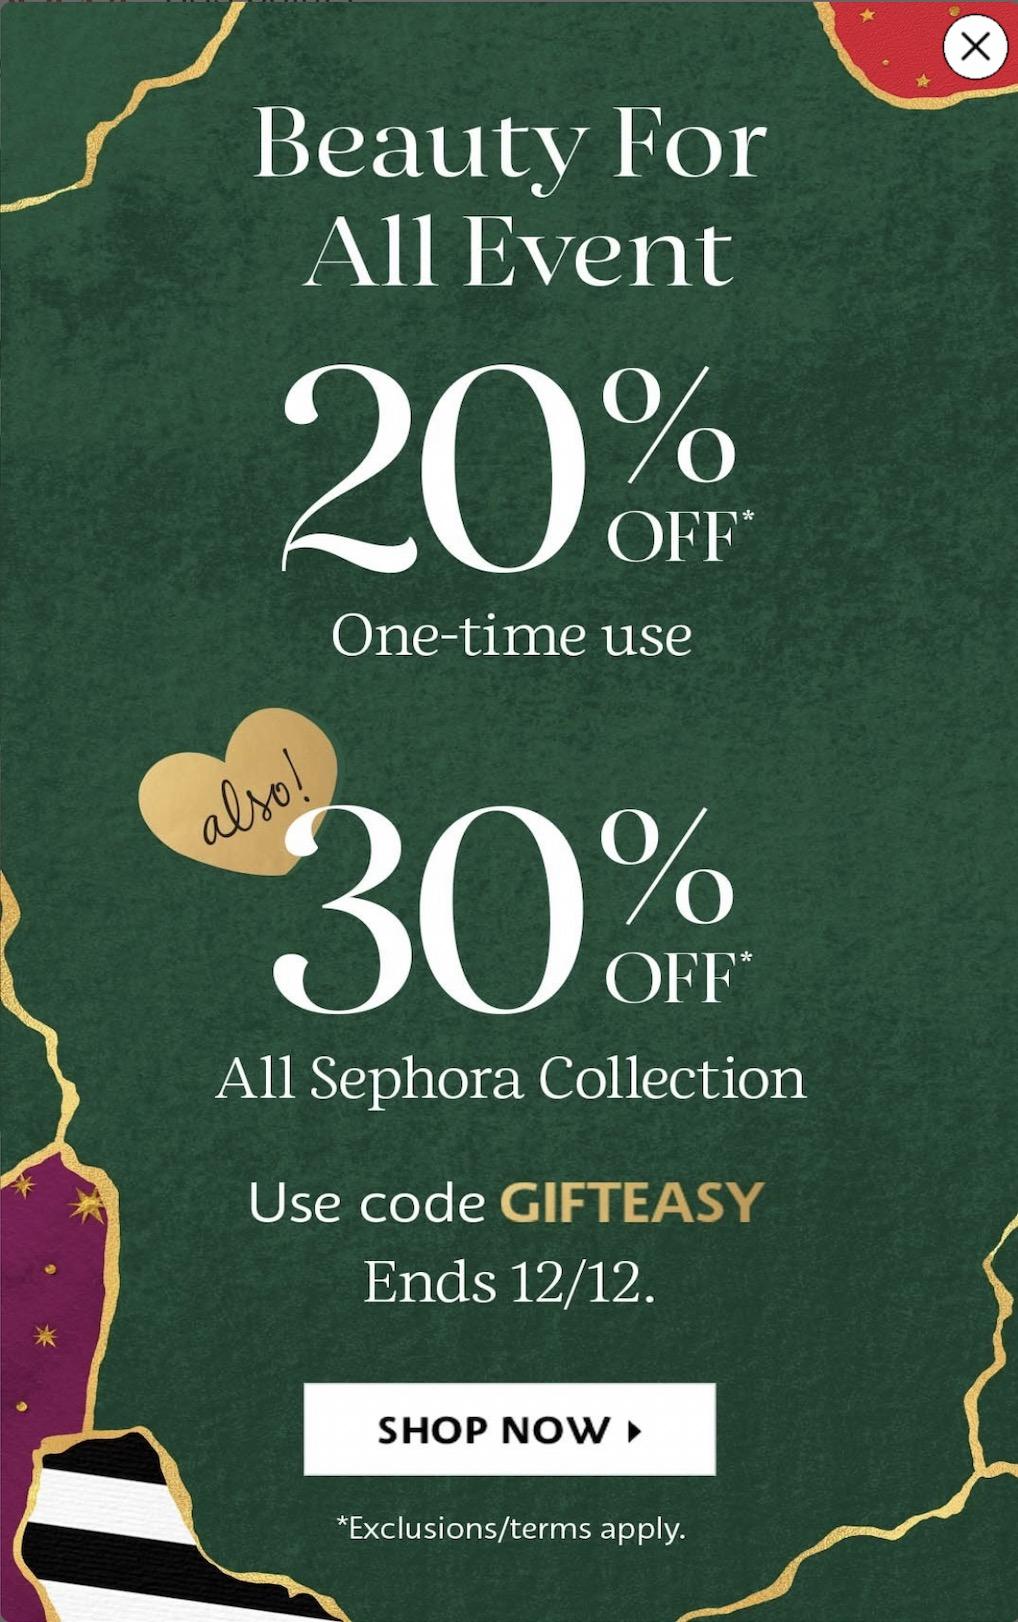 Sephora Beauty For All Event – Save 20% off Sitewide!